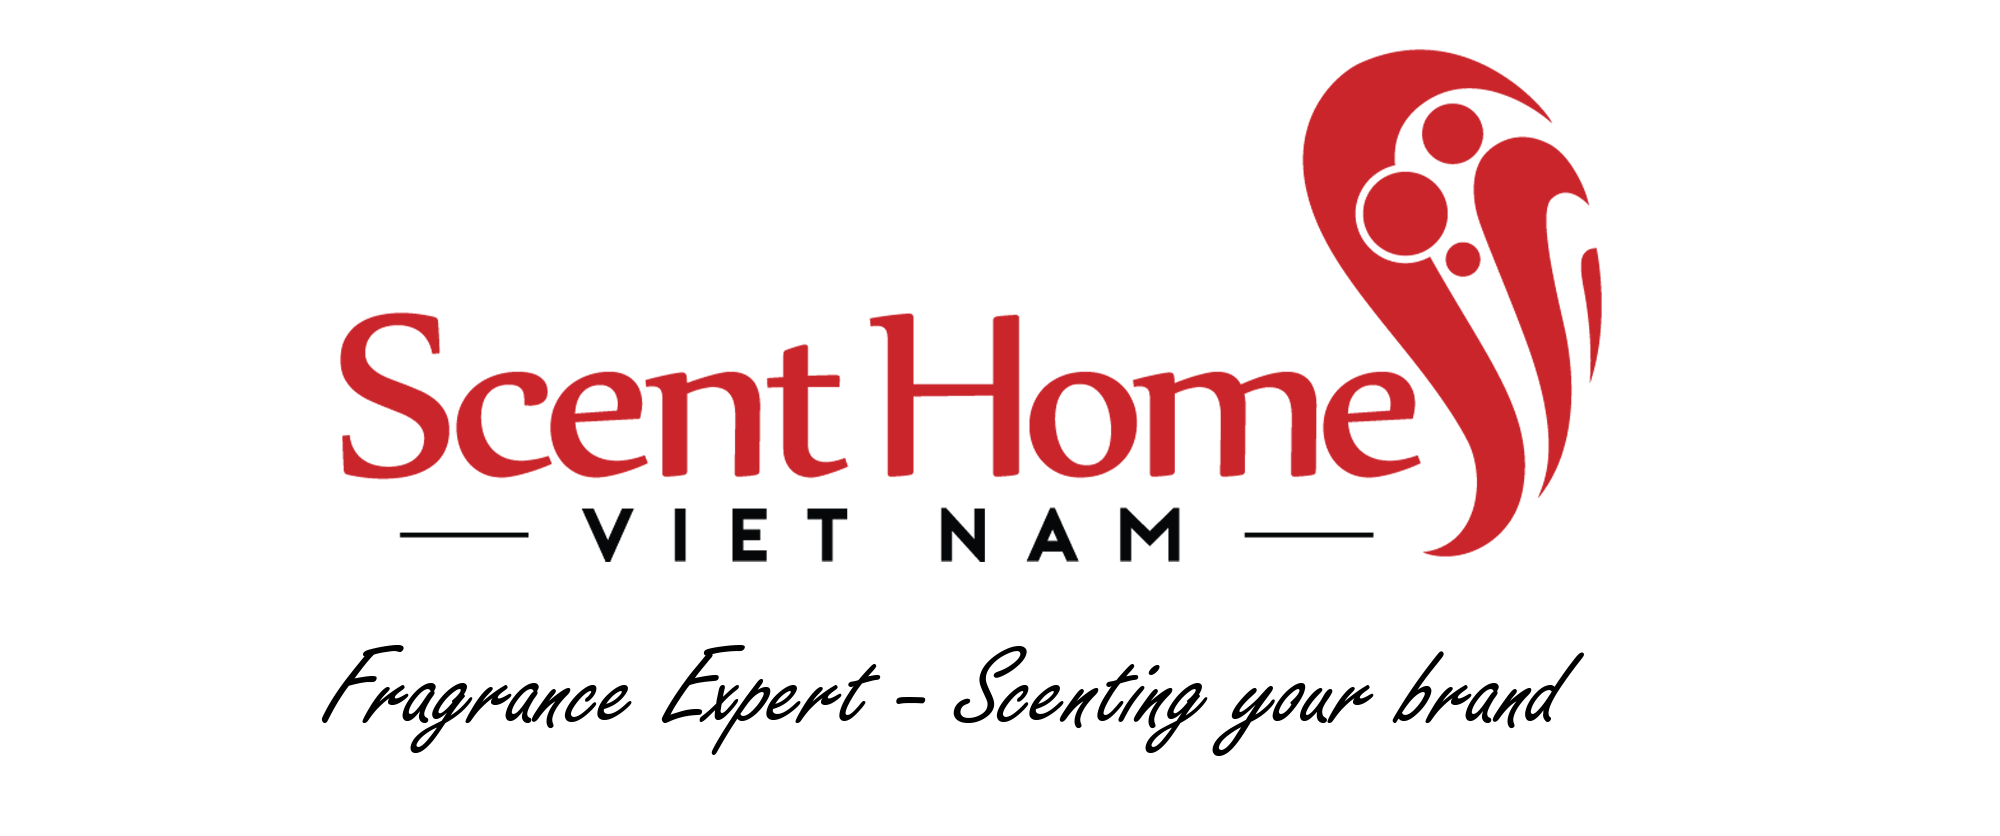 Scent Homes Việt Nam - Fragrance Expert - Scenting your brand